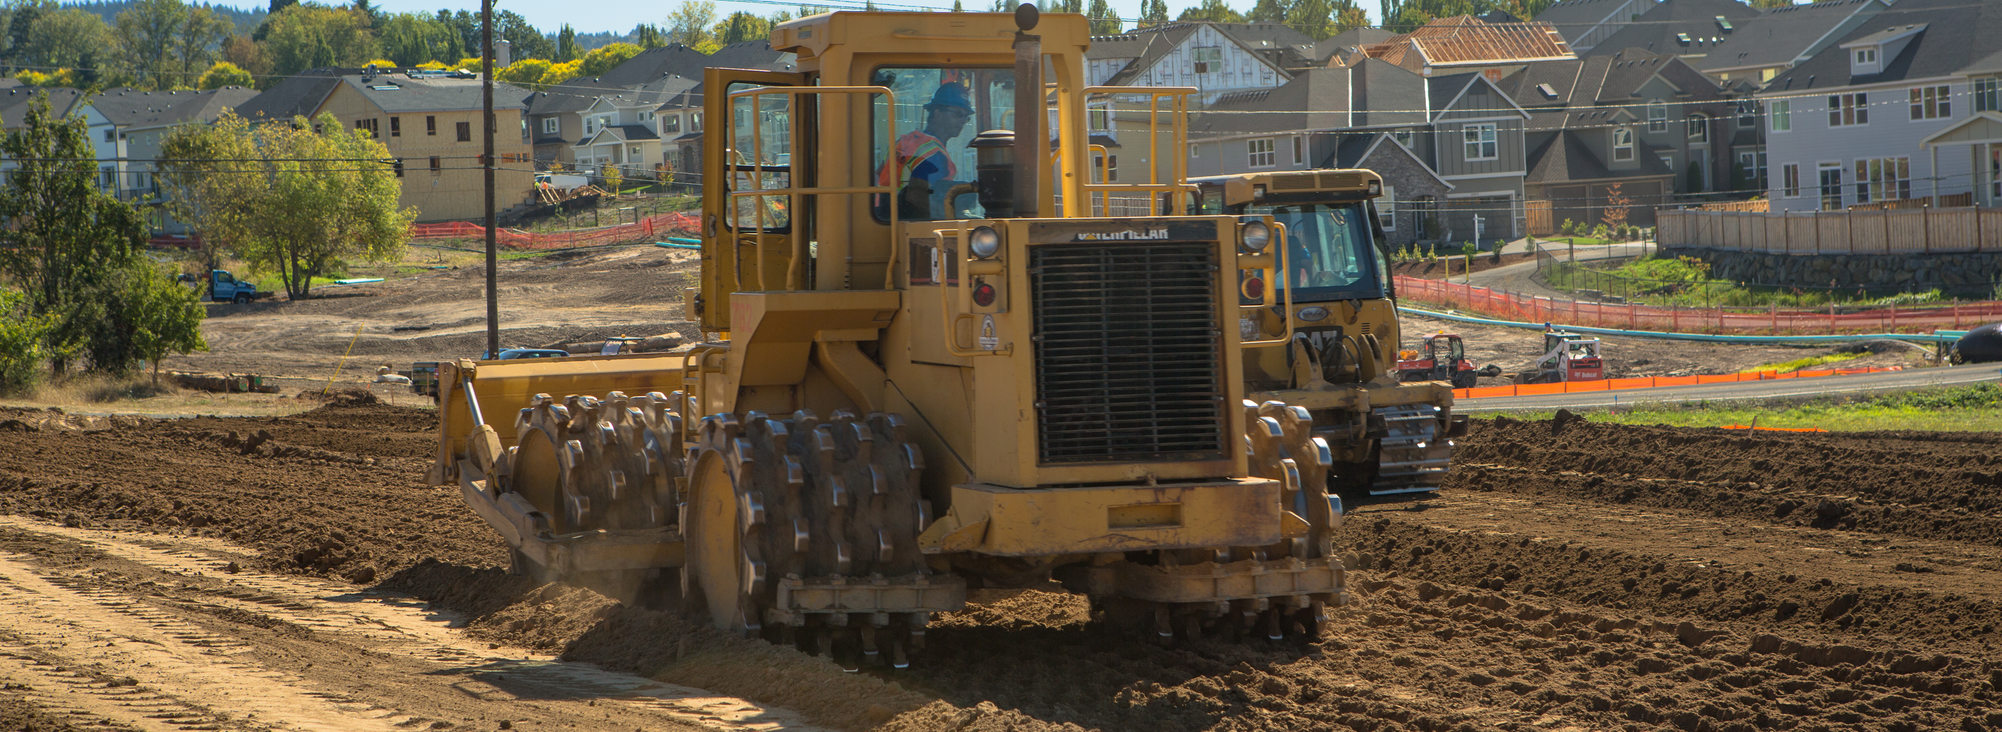 North Bethany tractor and homes under construction